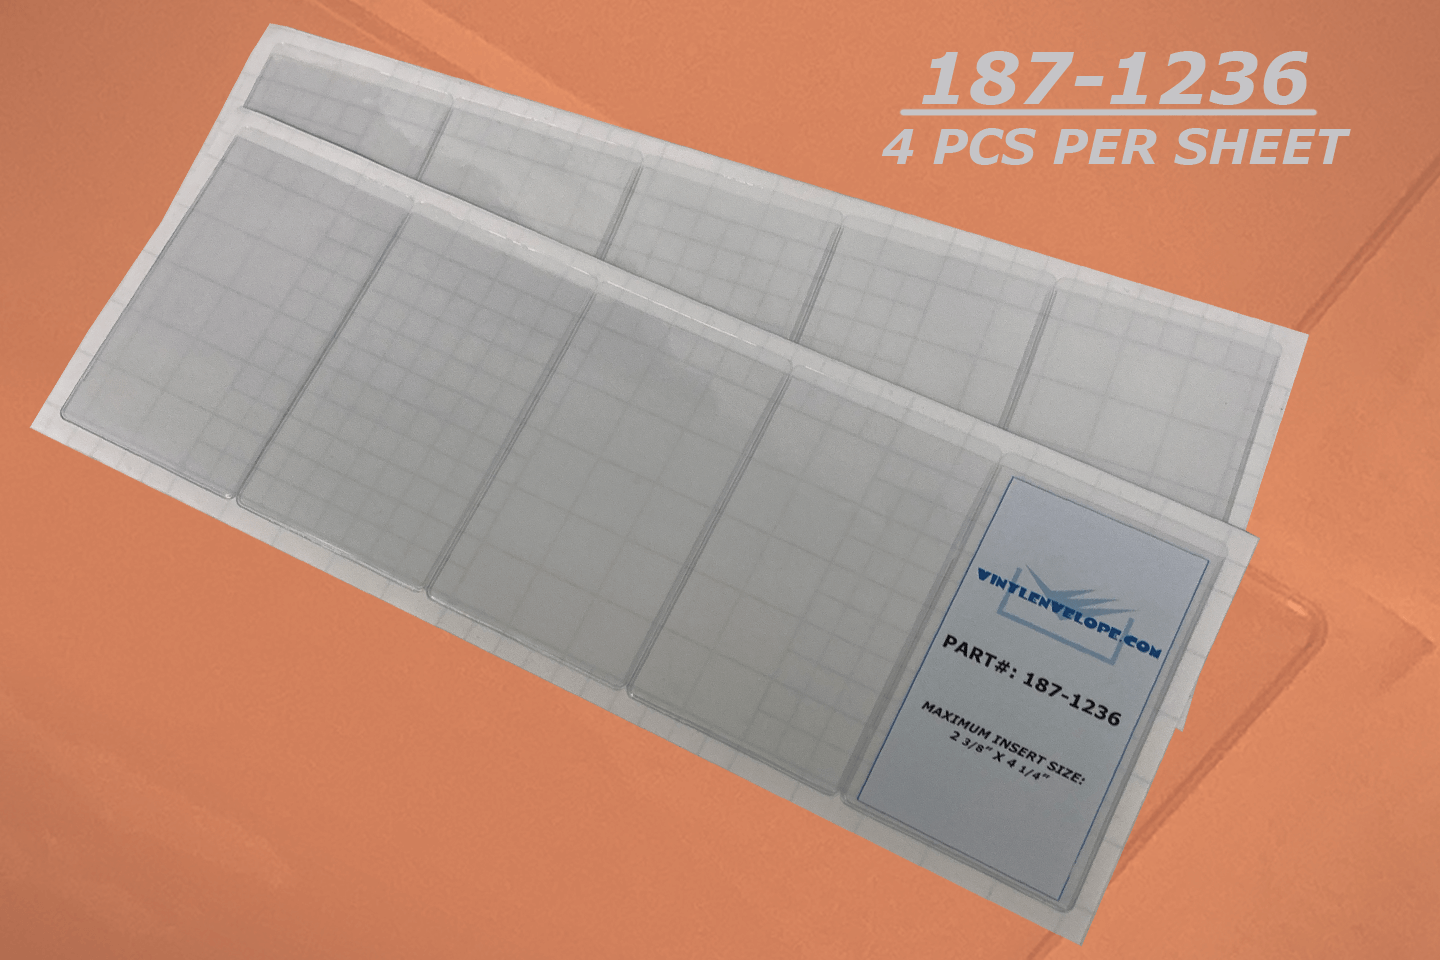 2 1/2" X 4 1/4" Removable Adhesive Pouch